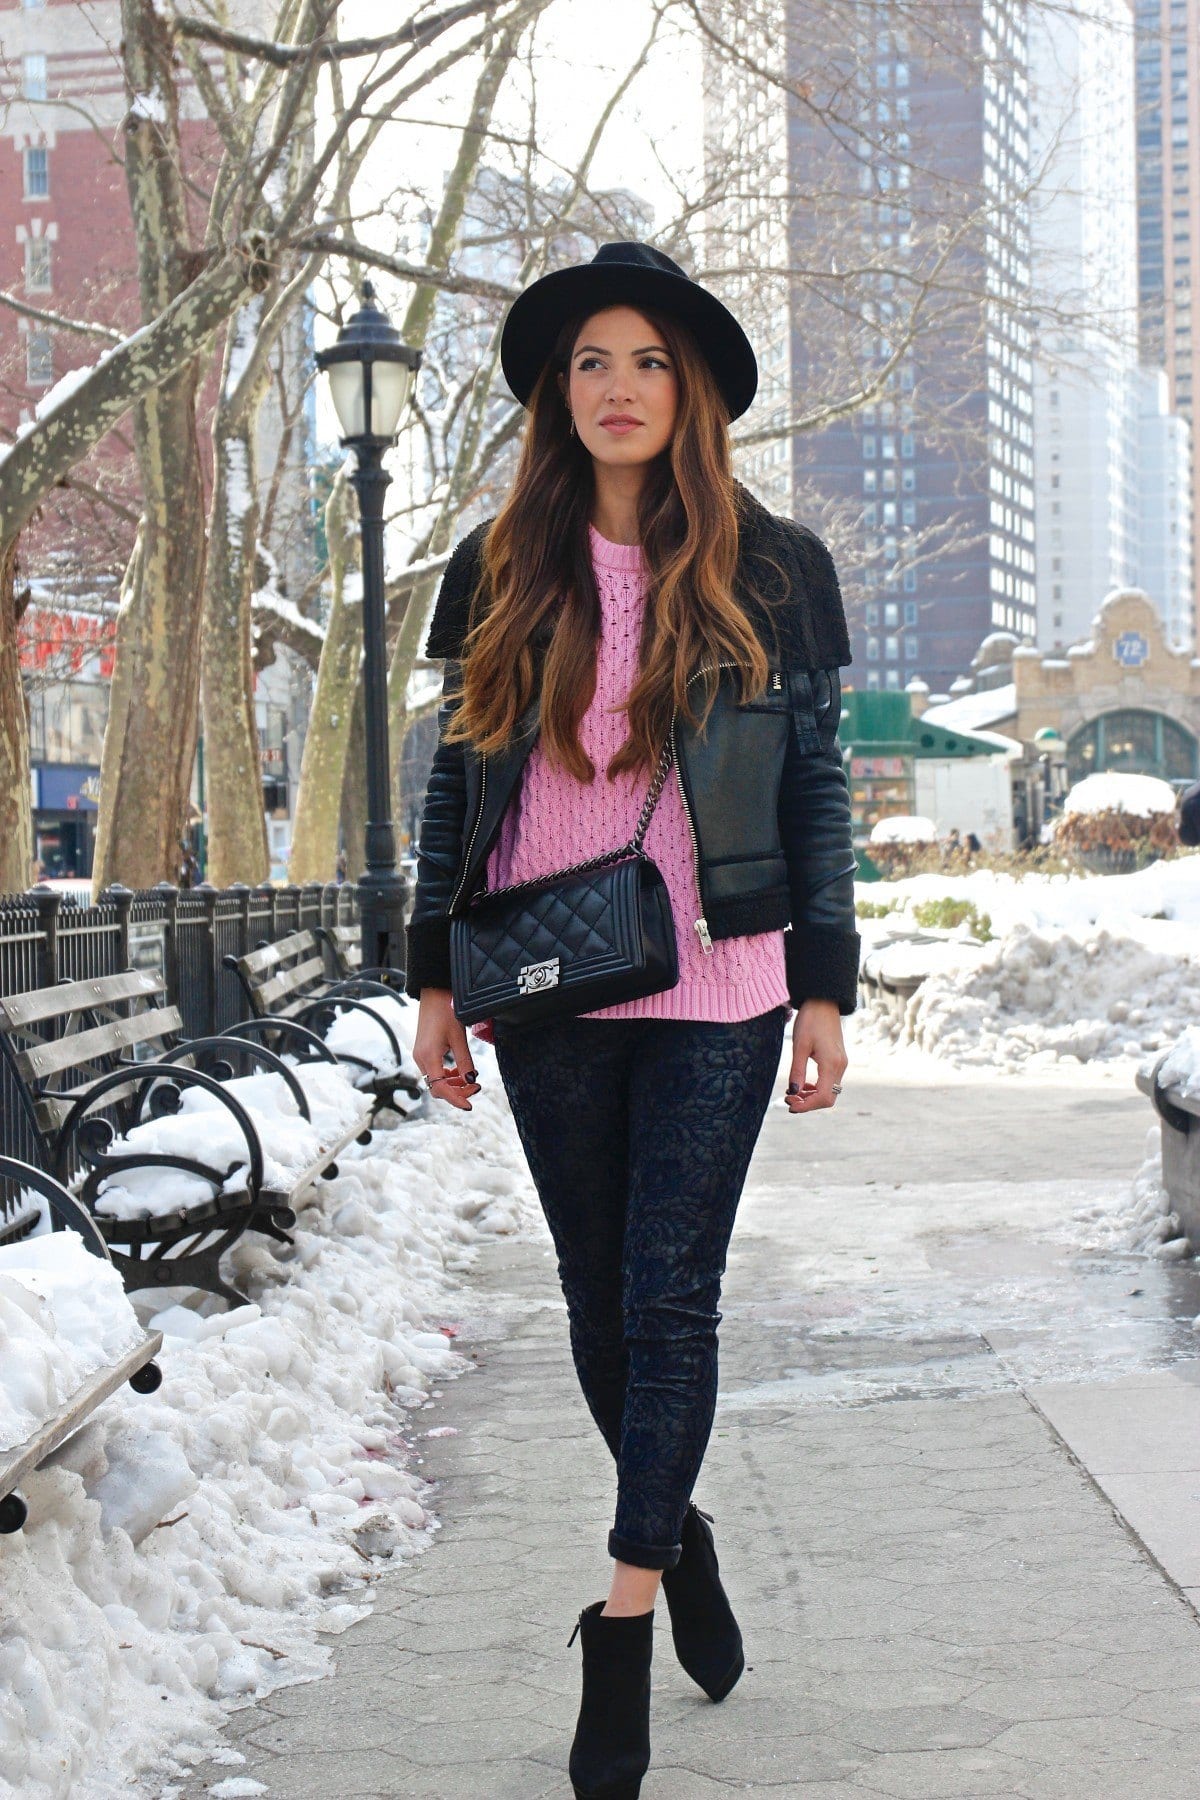 Cozy Winter Outfit Idea20 Cute and Warm Outfits for Winters